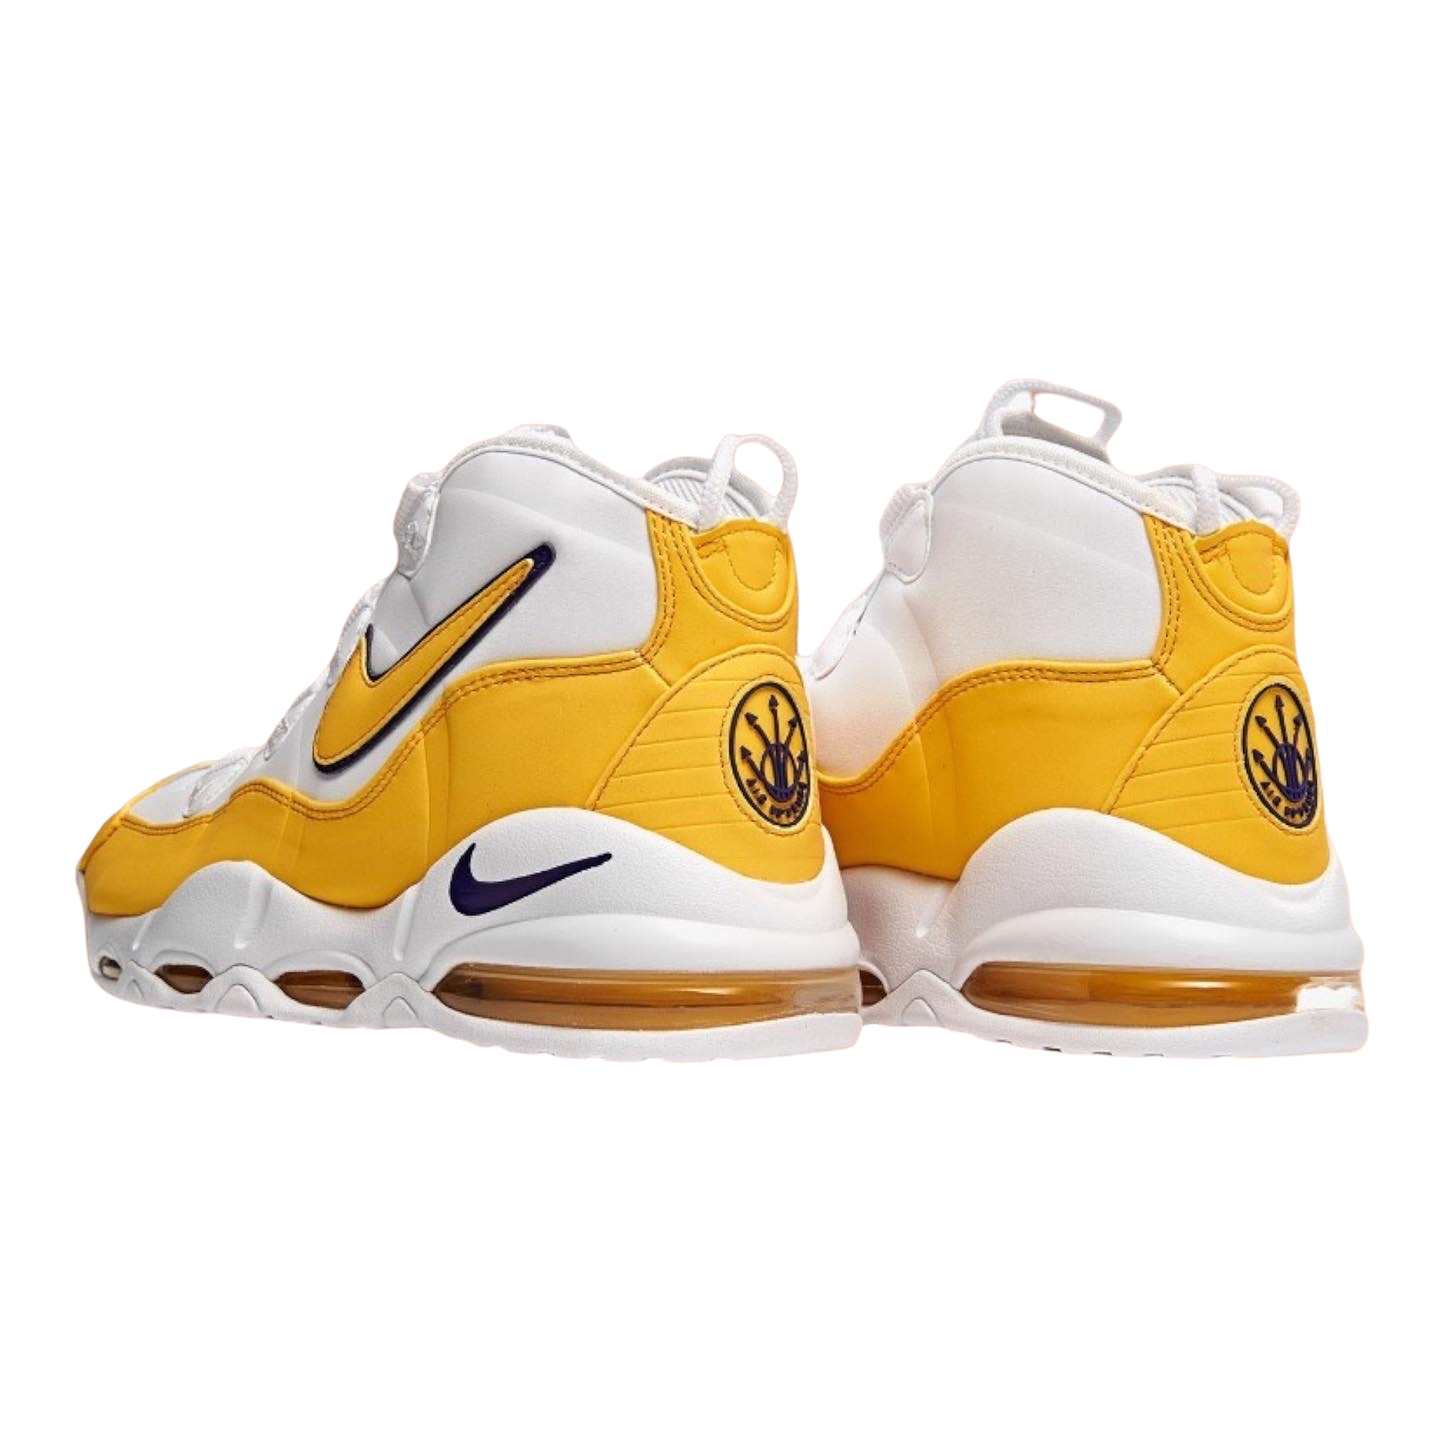 Nike Air Uptempo 95 Lakers - Stay